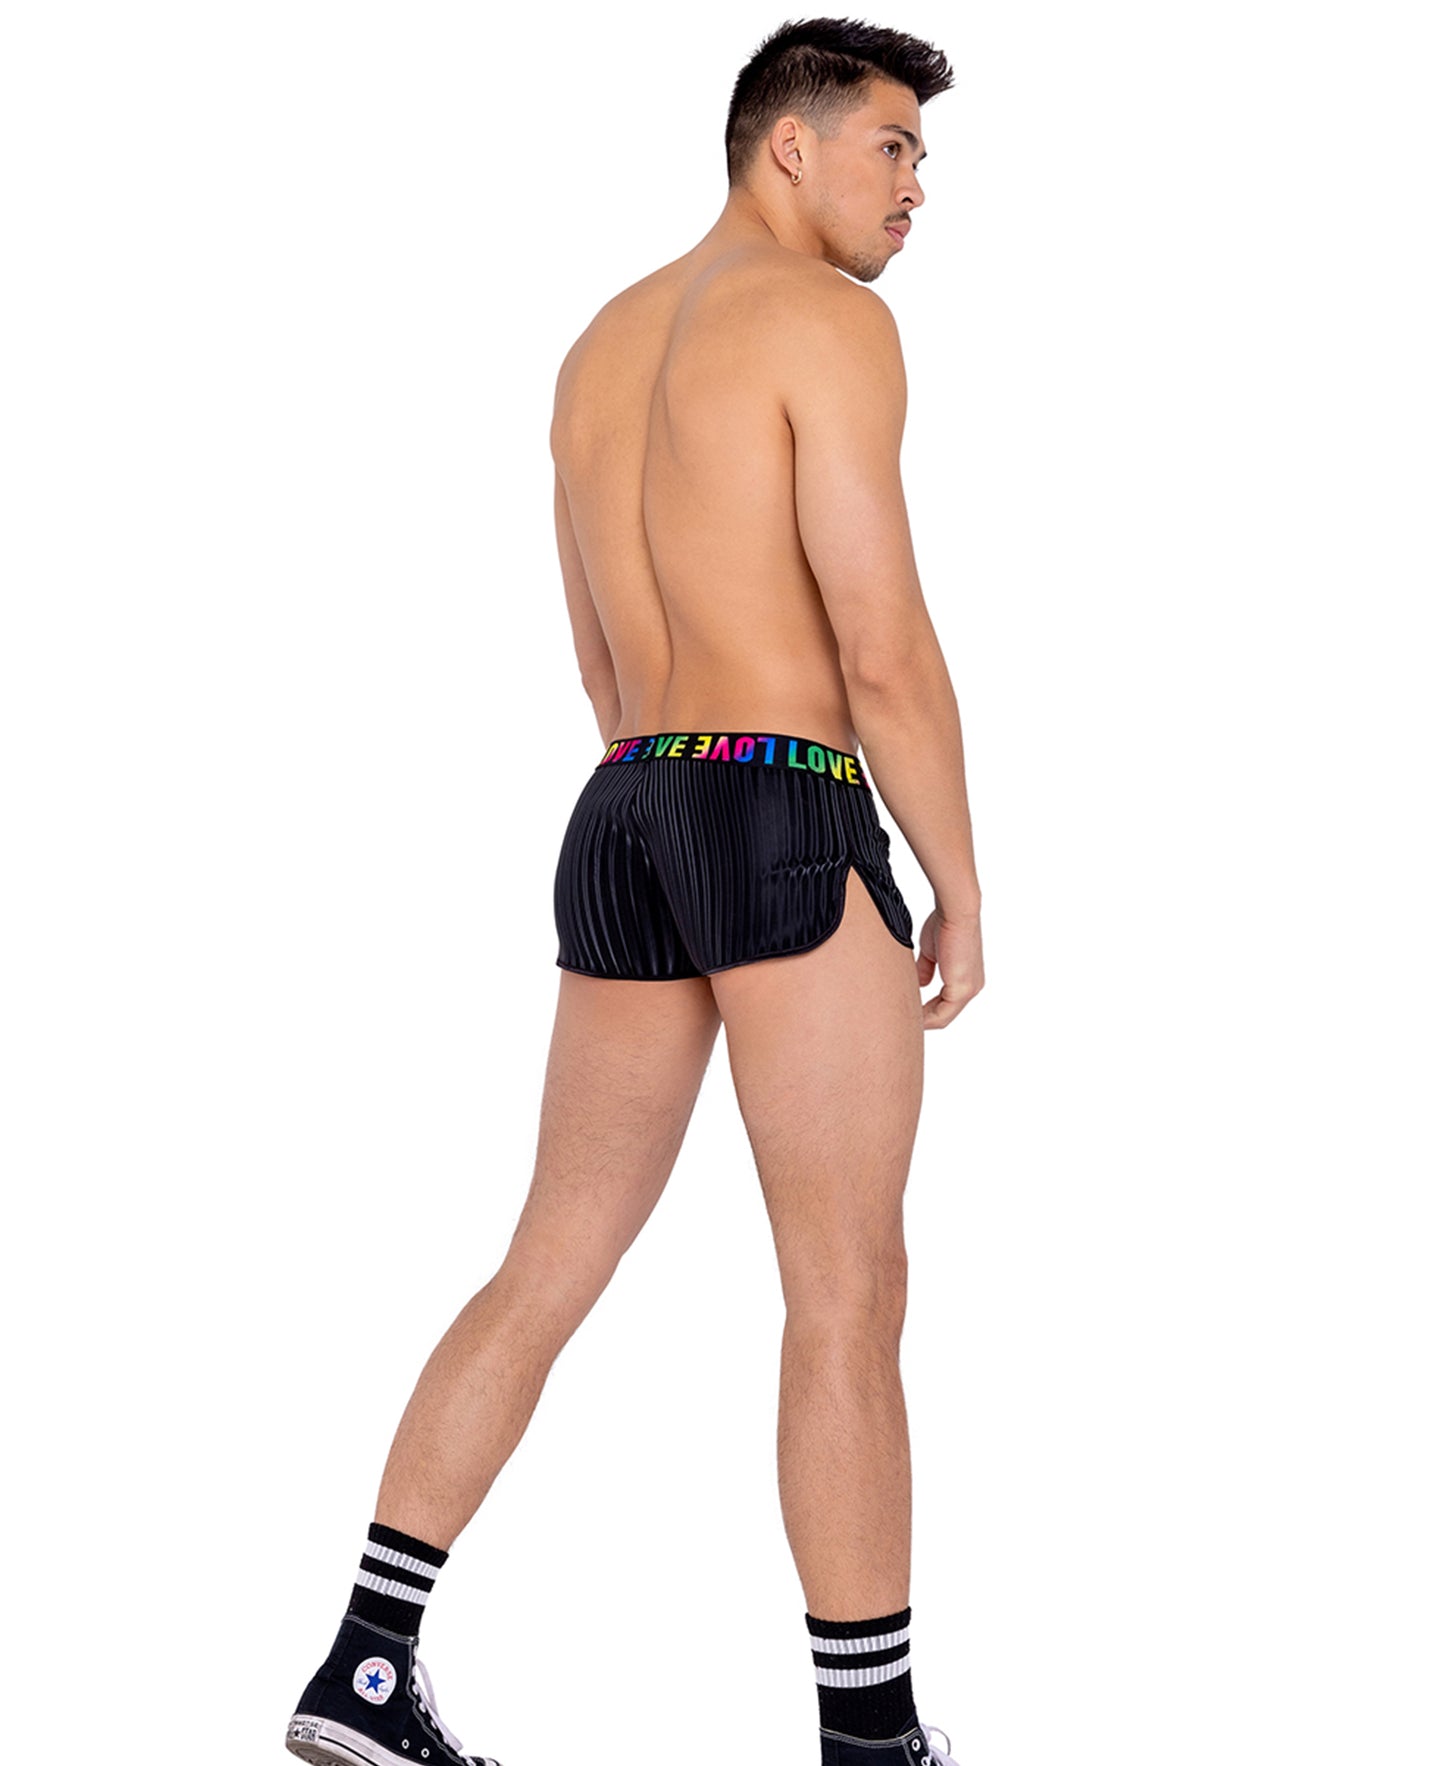 6152 Men’s Pride Runner Shorts with LOVE Elastic Band rear view